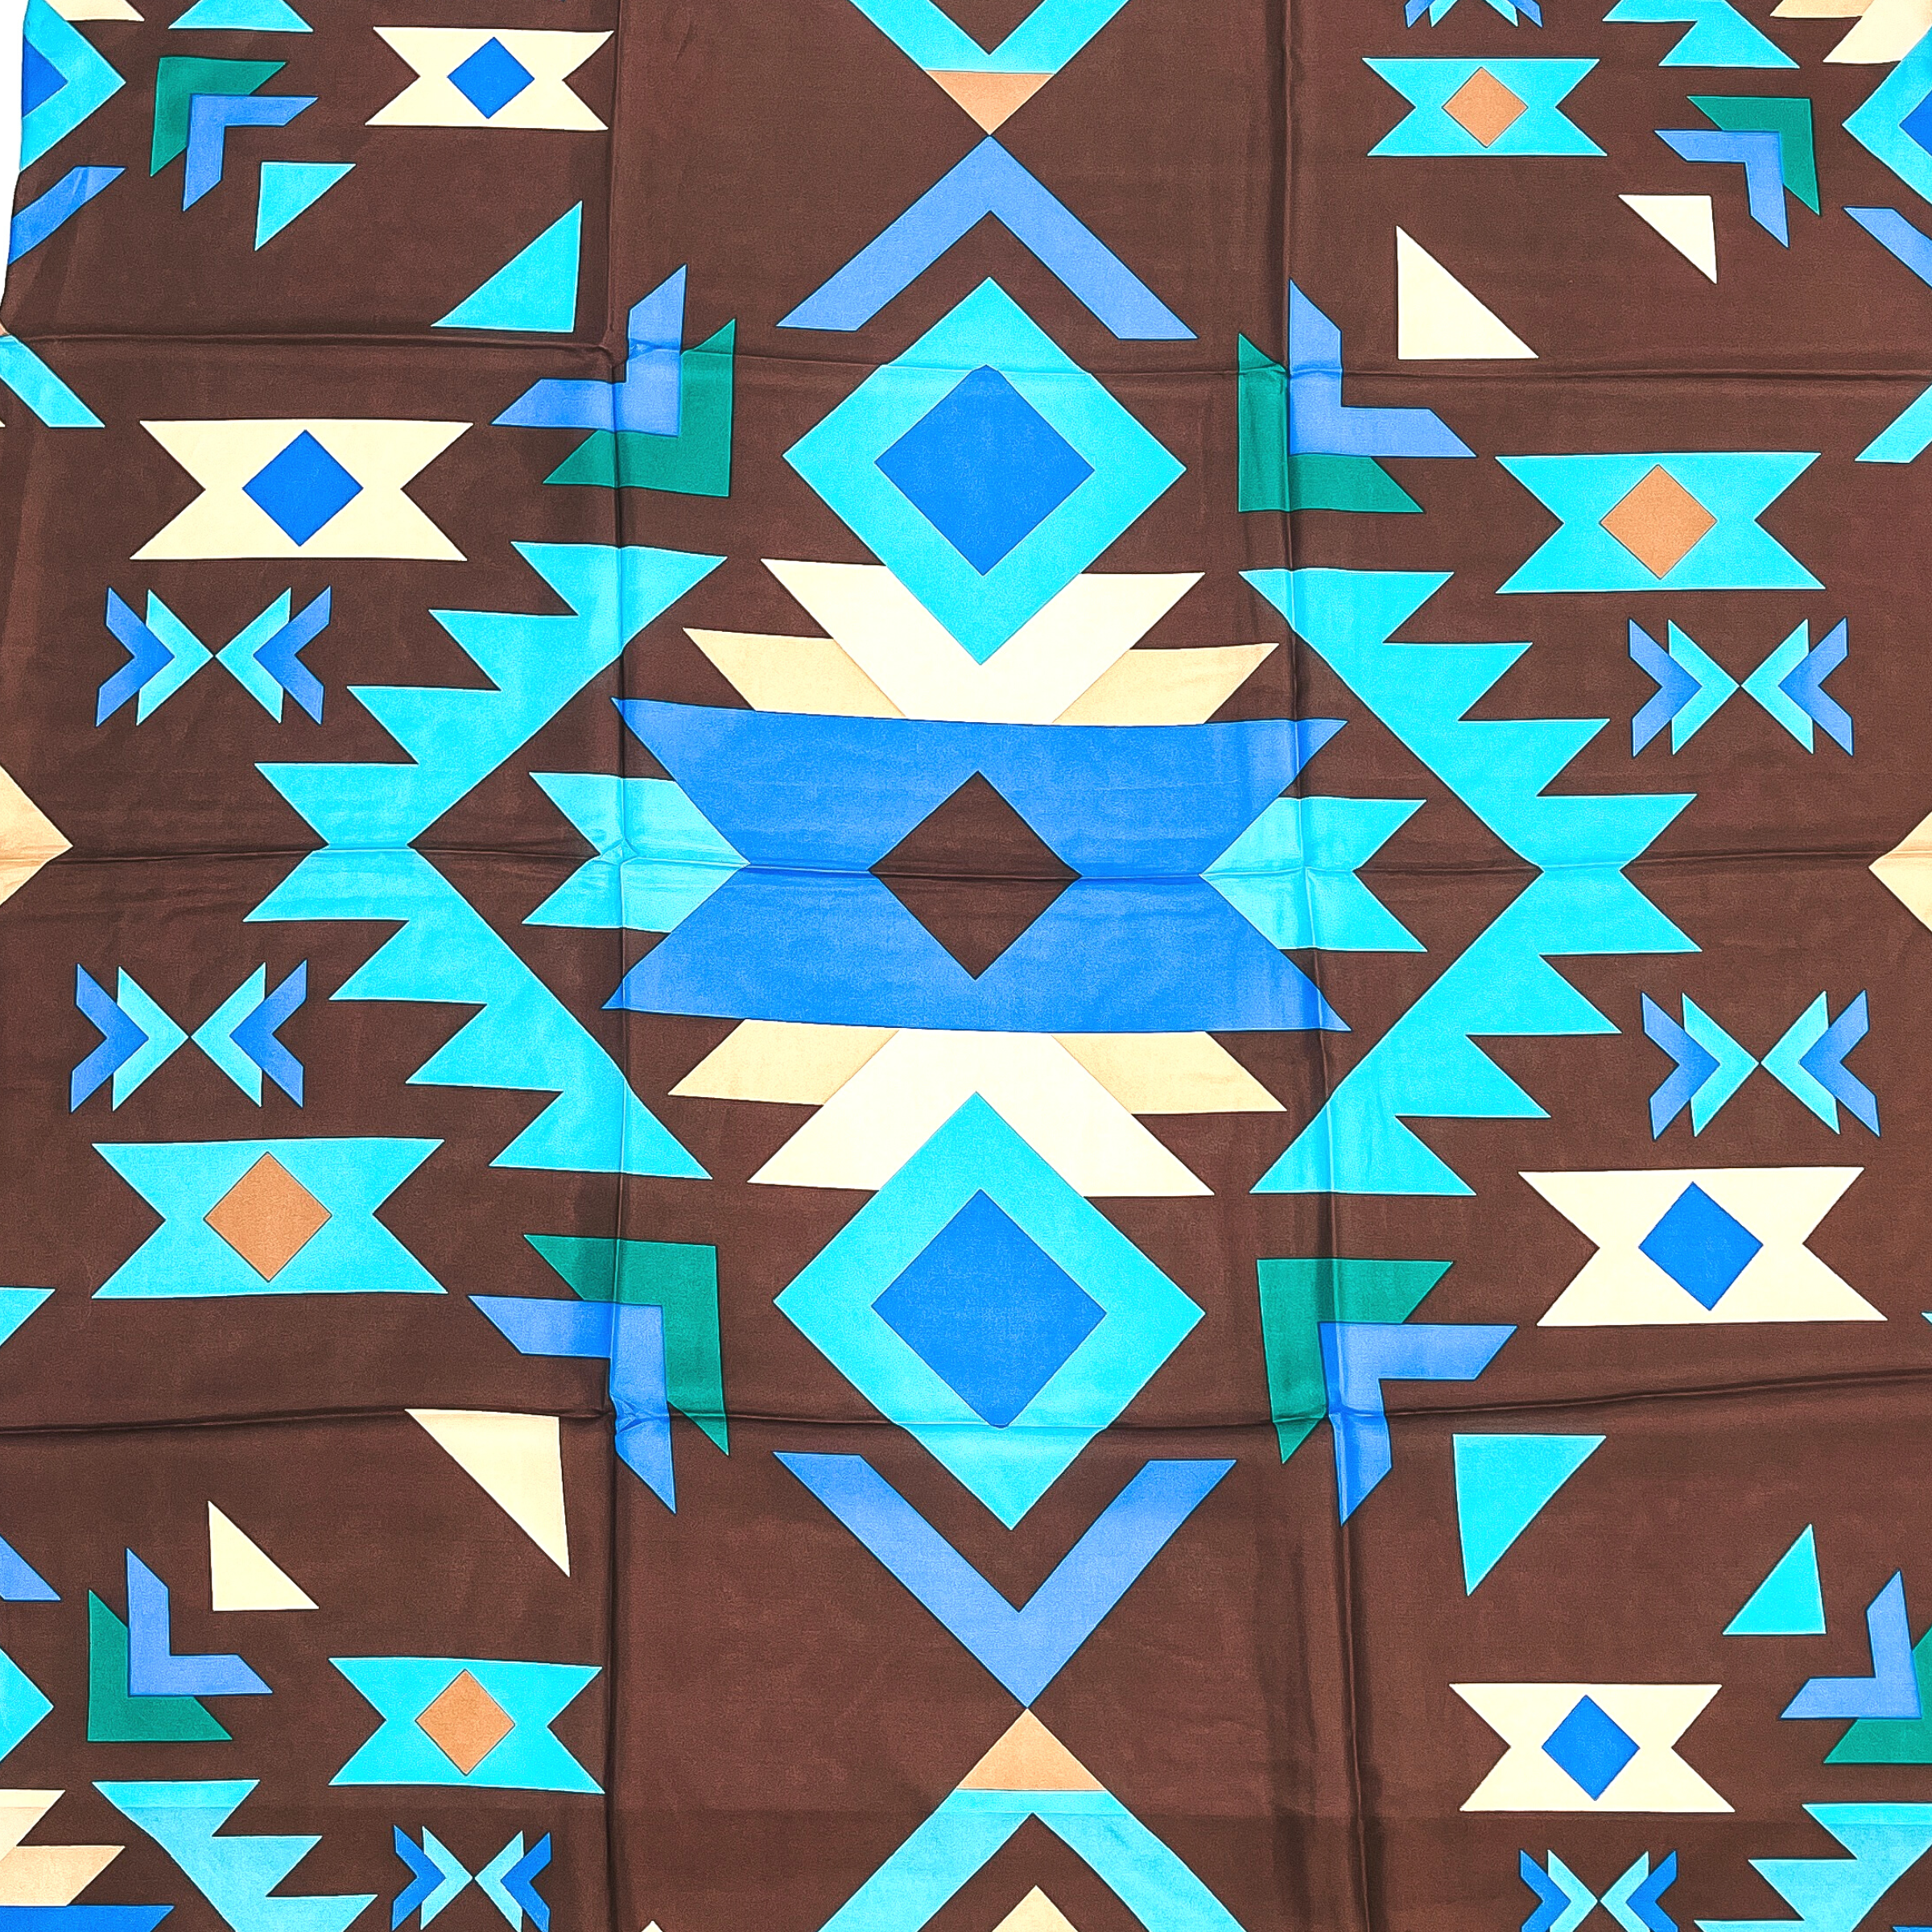 This is a tribal print in brown, beige, turquoise, and blue with various geometric shapes.